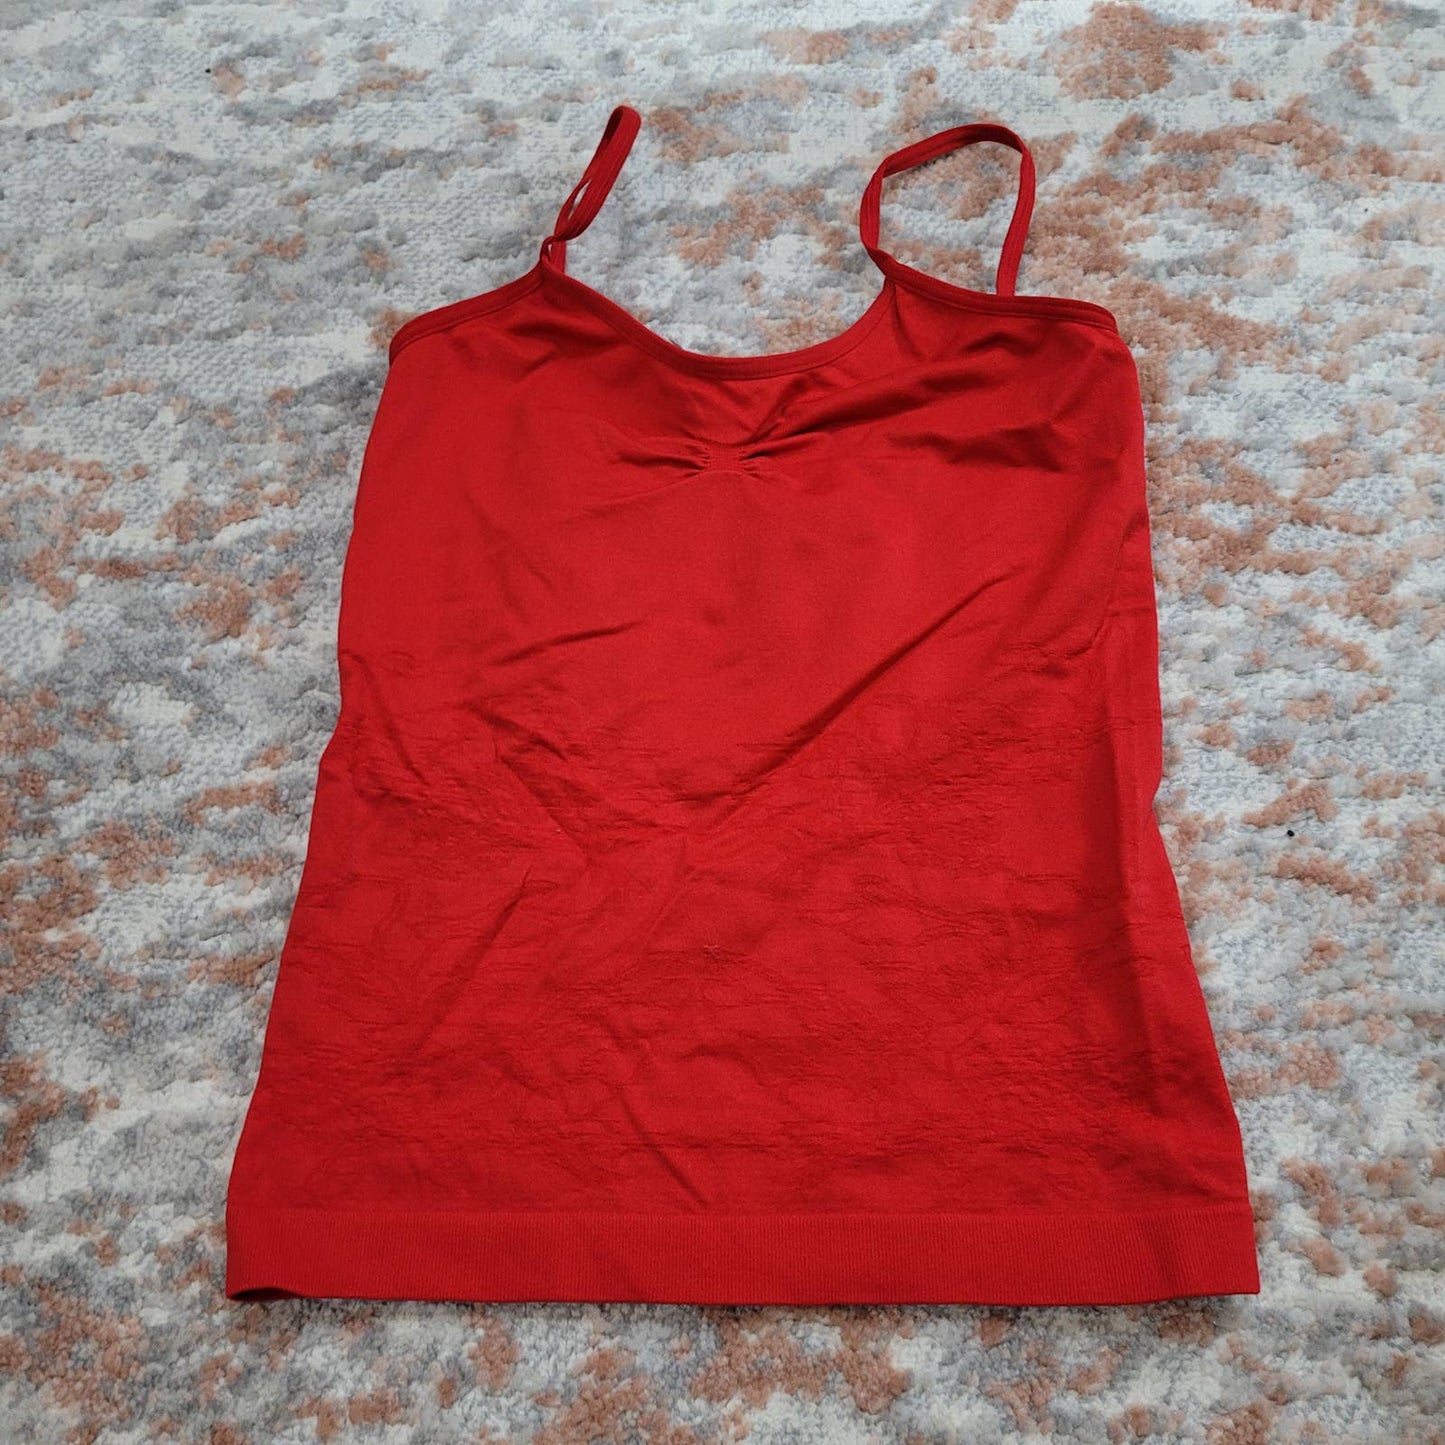 Isabelle Red Tank - Size Extra Small